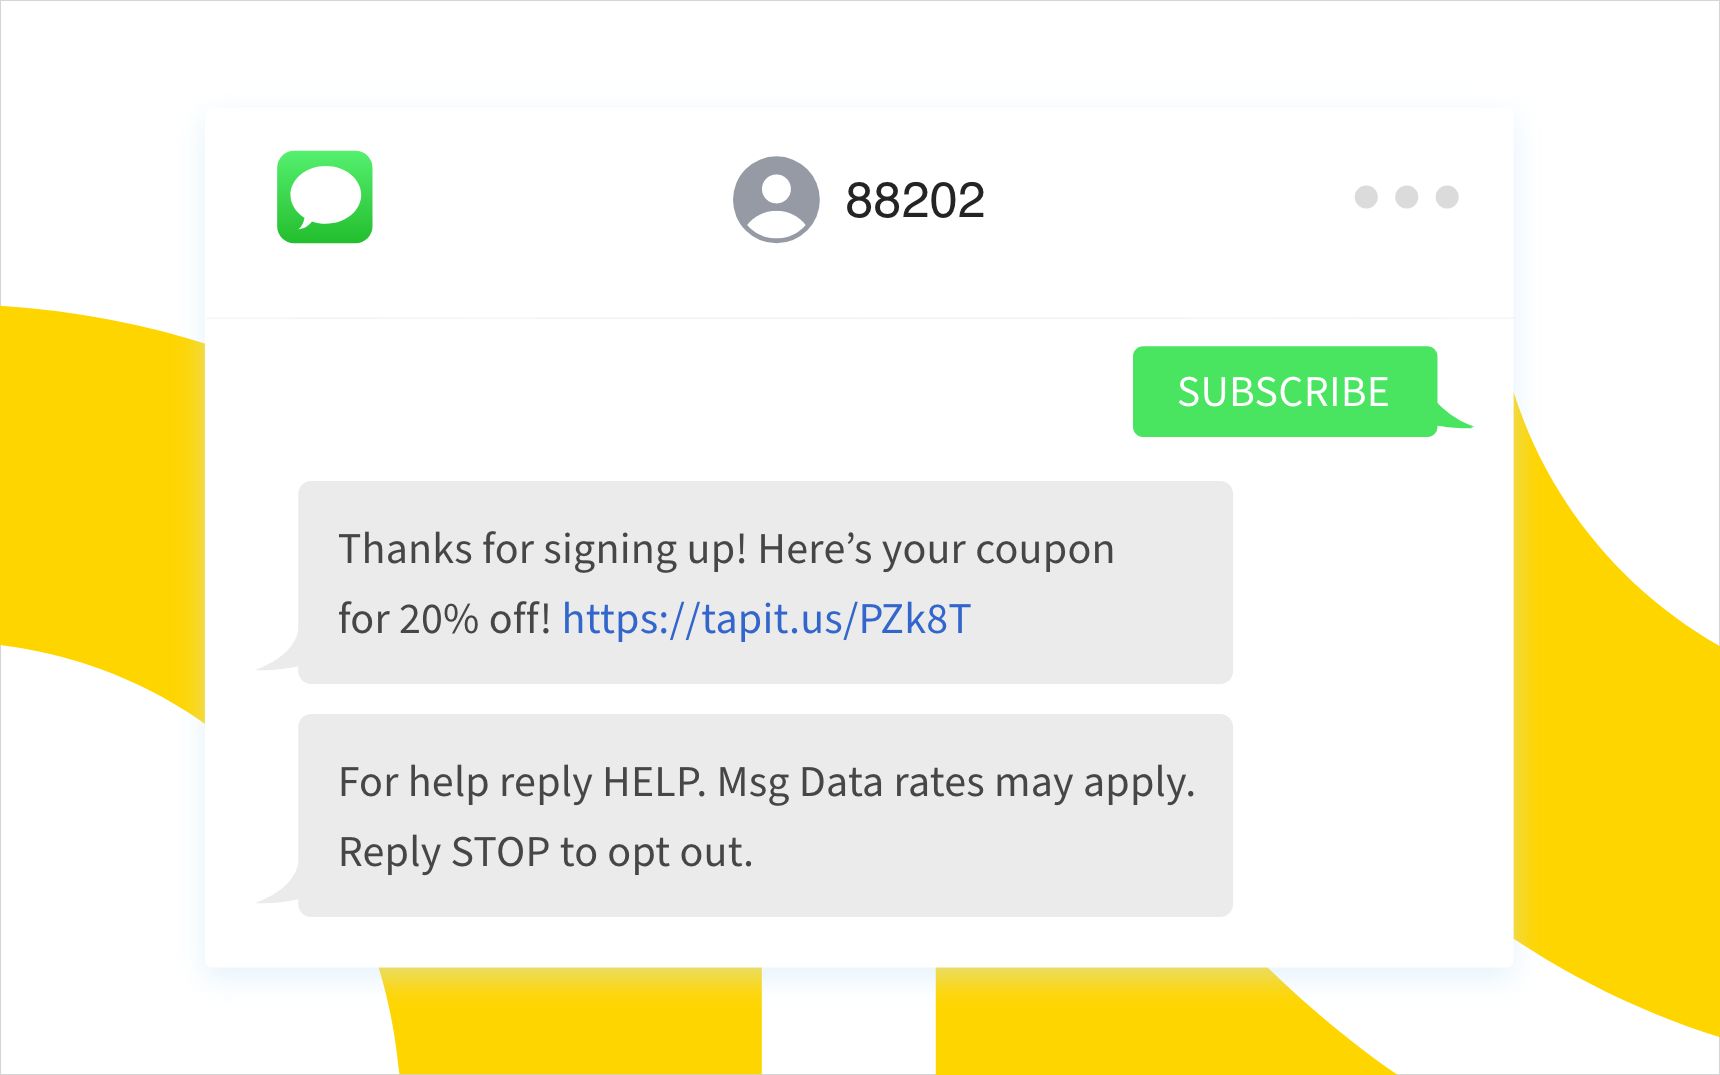 A script for an opt-in SMS message. It’s a good idea to have an opt-in SMS message campaign built into your consent process